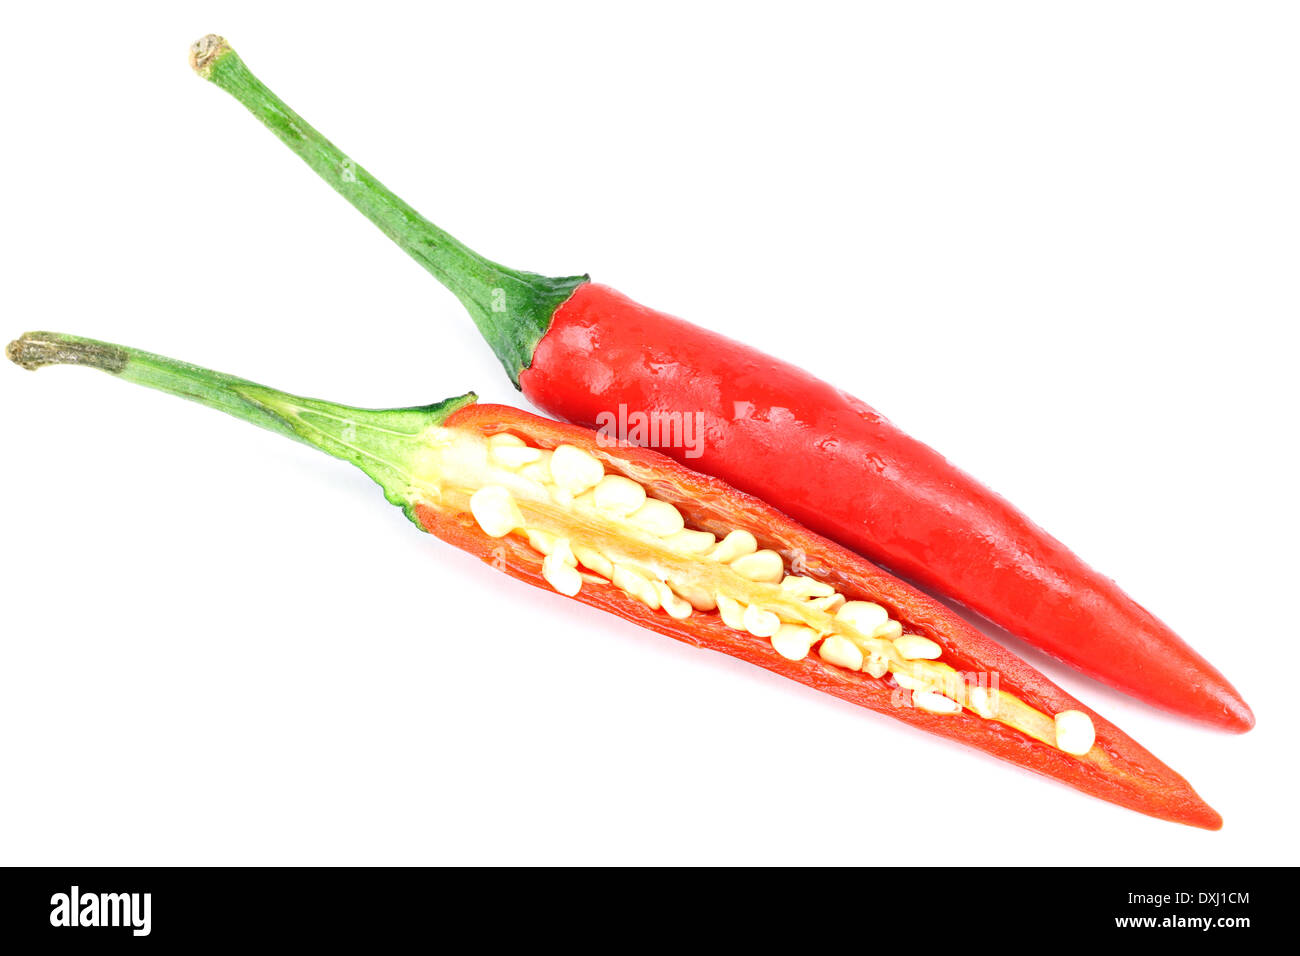 slices of red pepper chili isolated on white background. Stock Photo